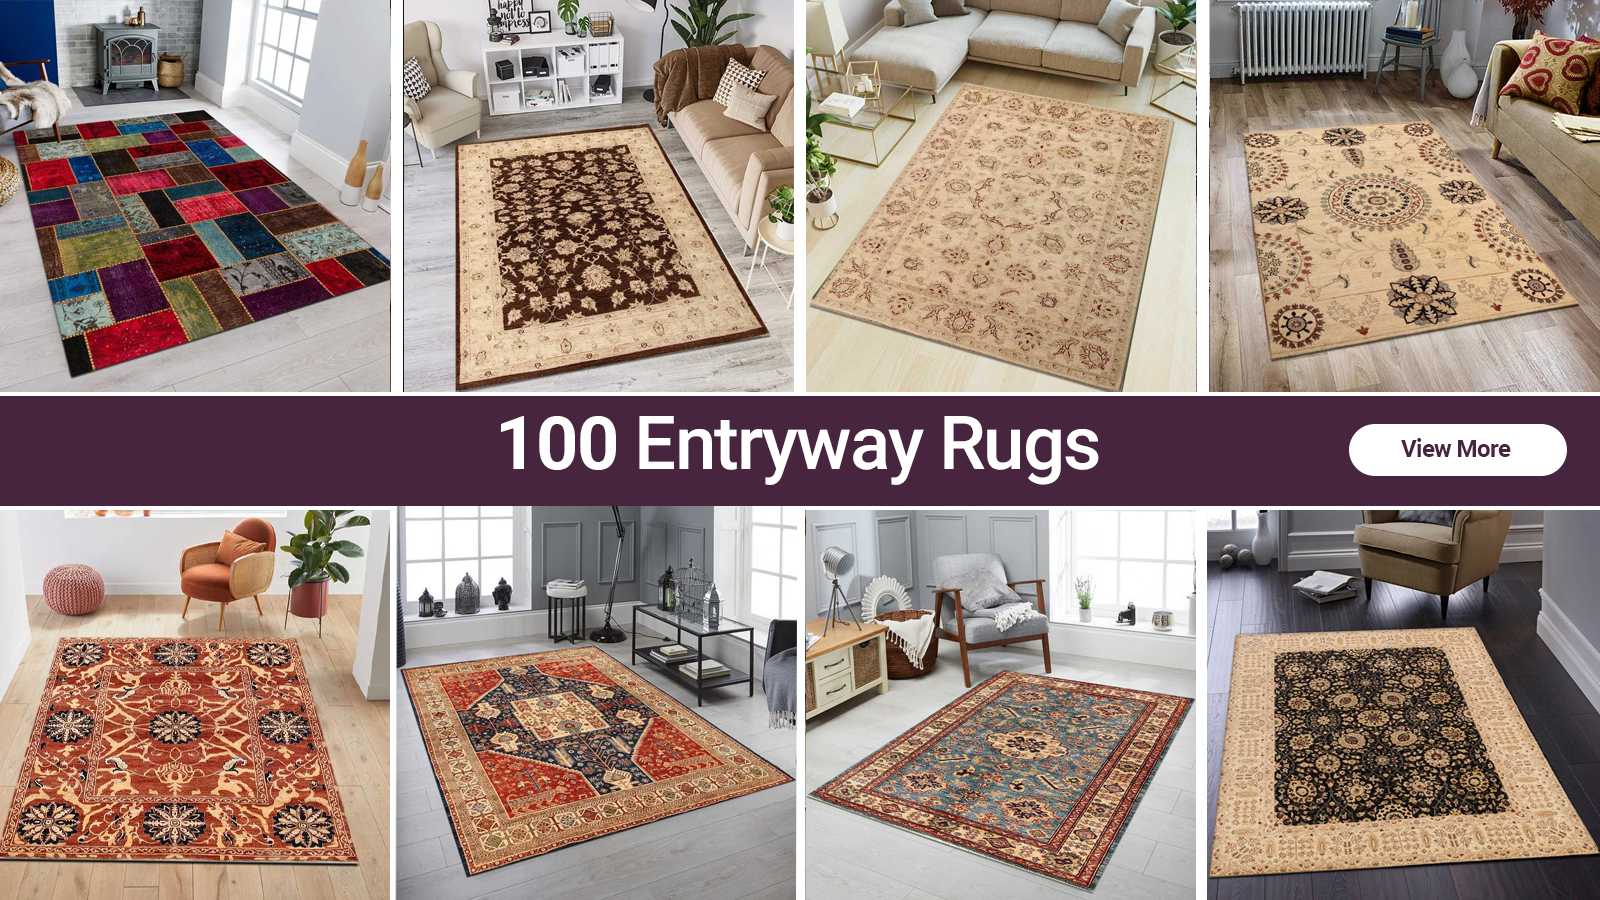 Decorate Your Entrance With Entryway Rug Ideas - RugKnots